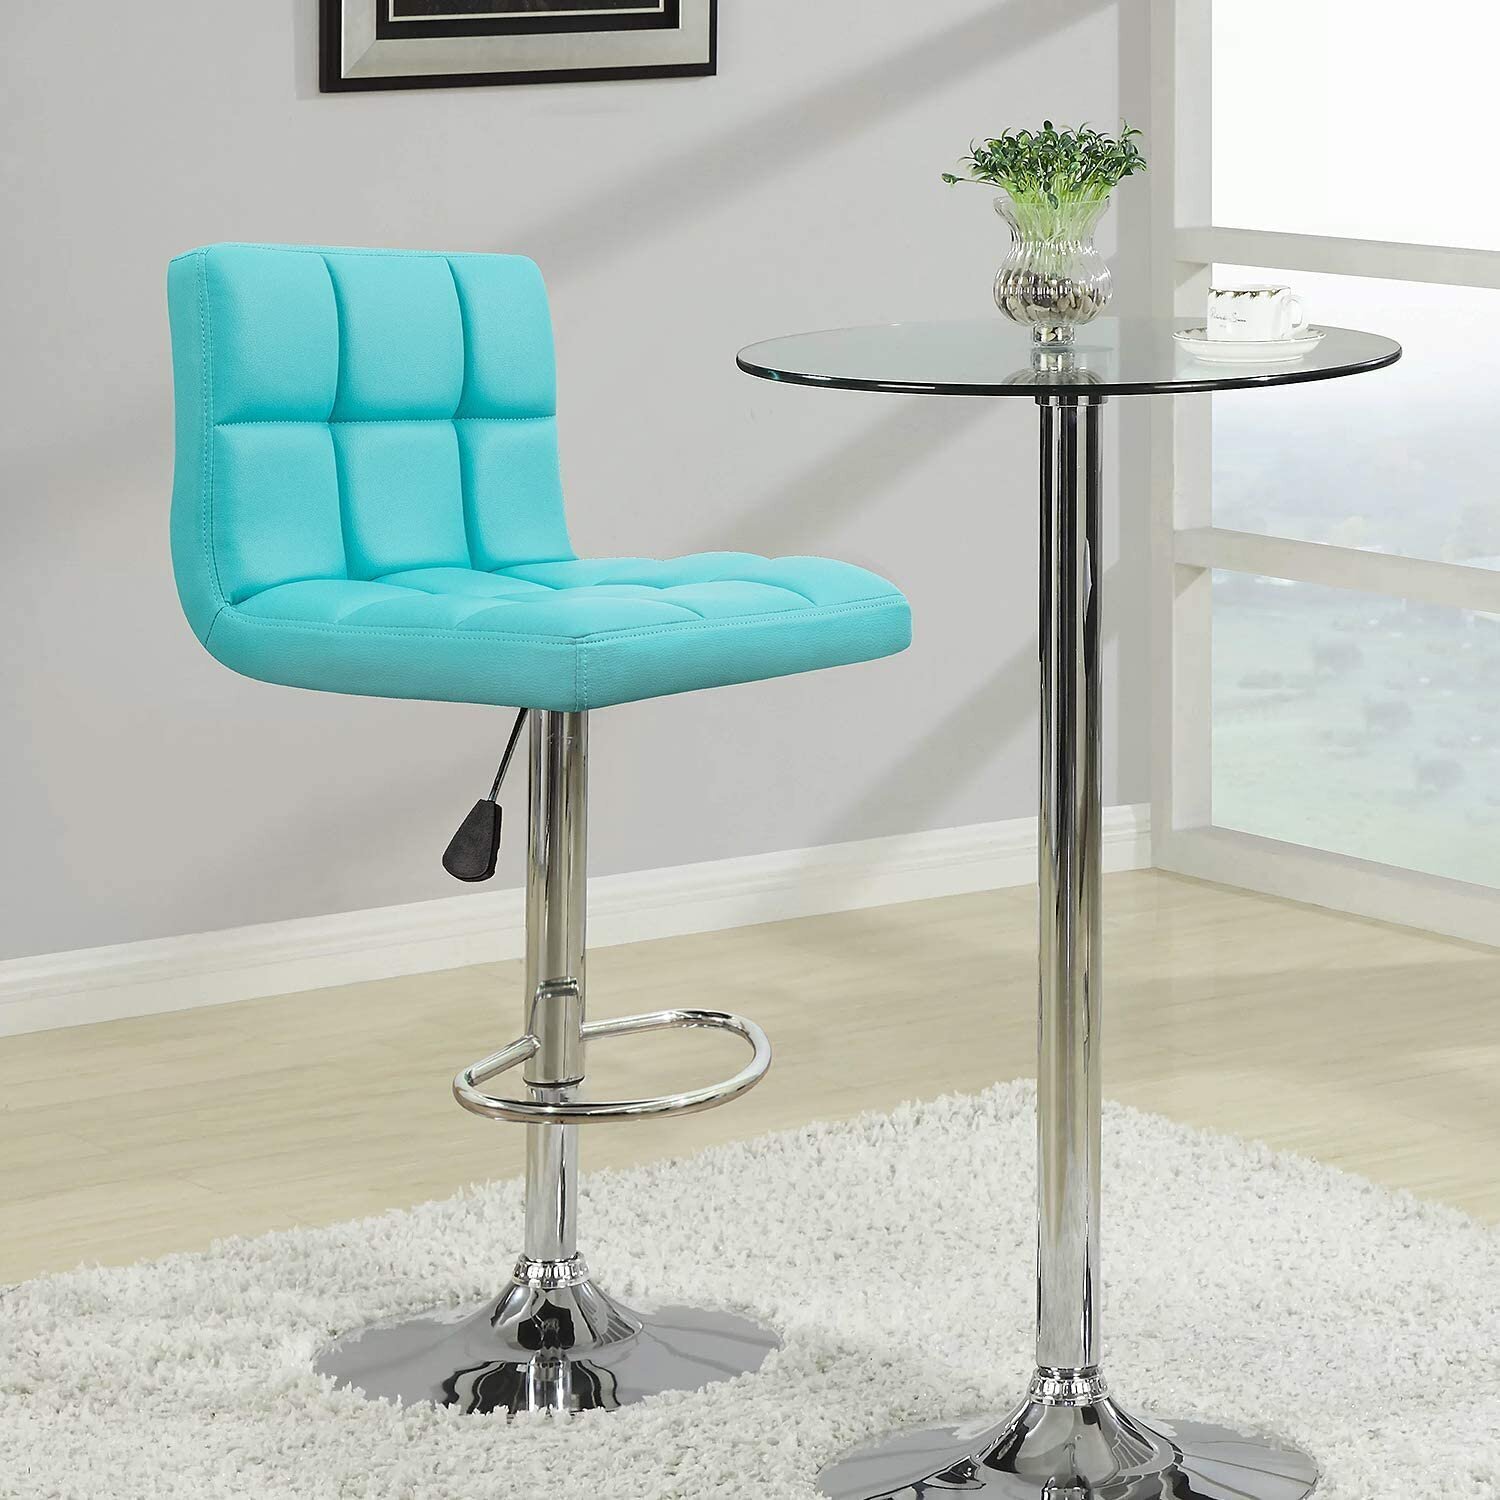 Turquoise leather bar stools in modern style